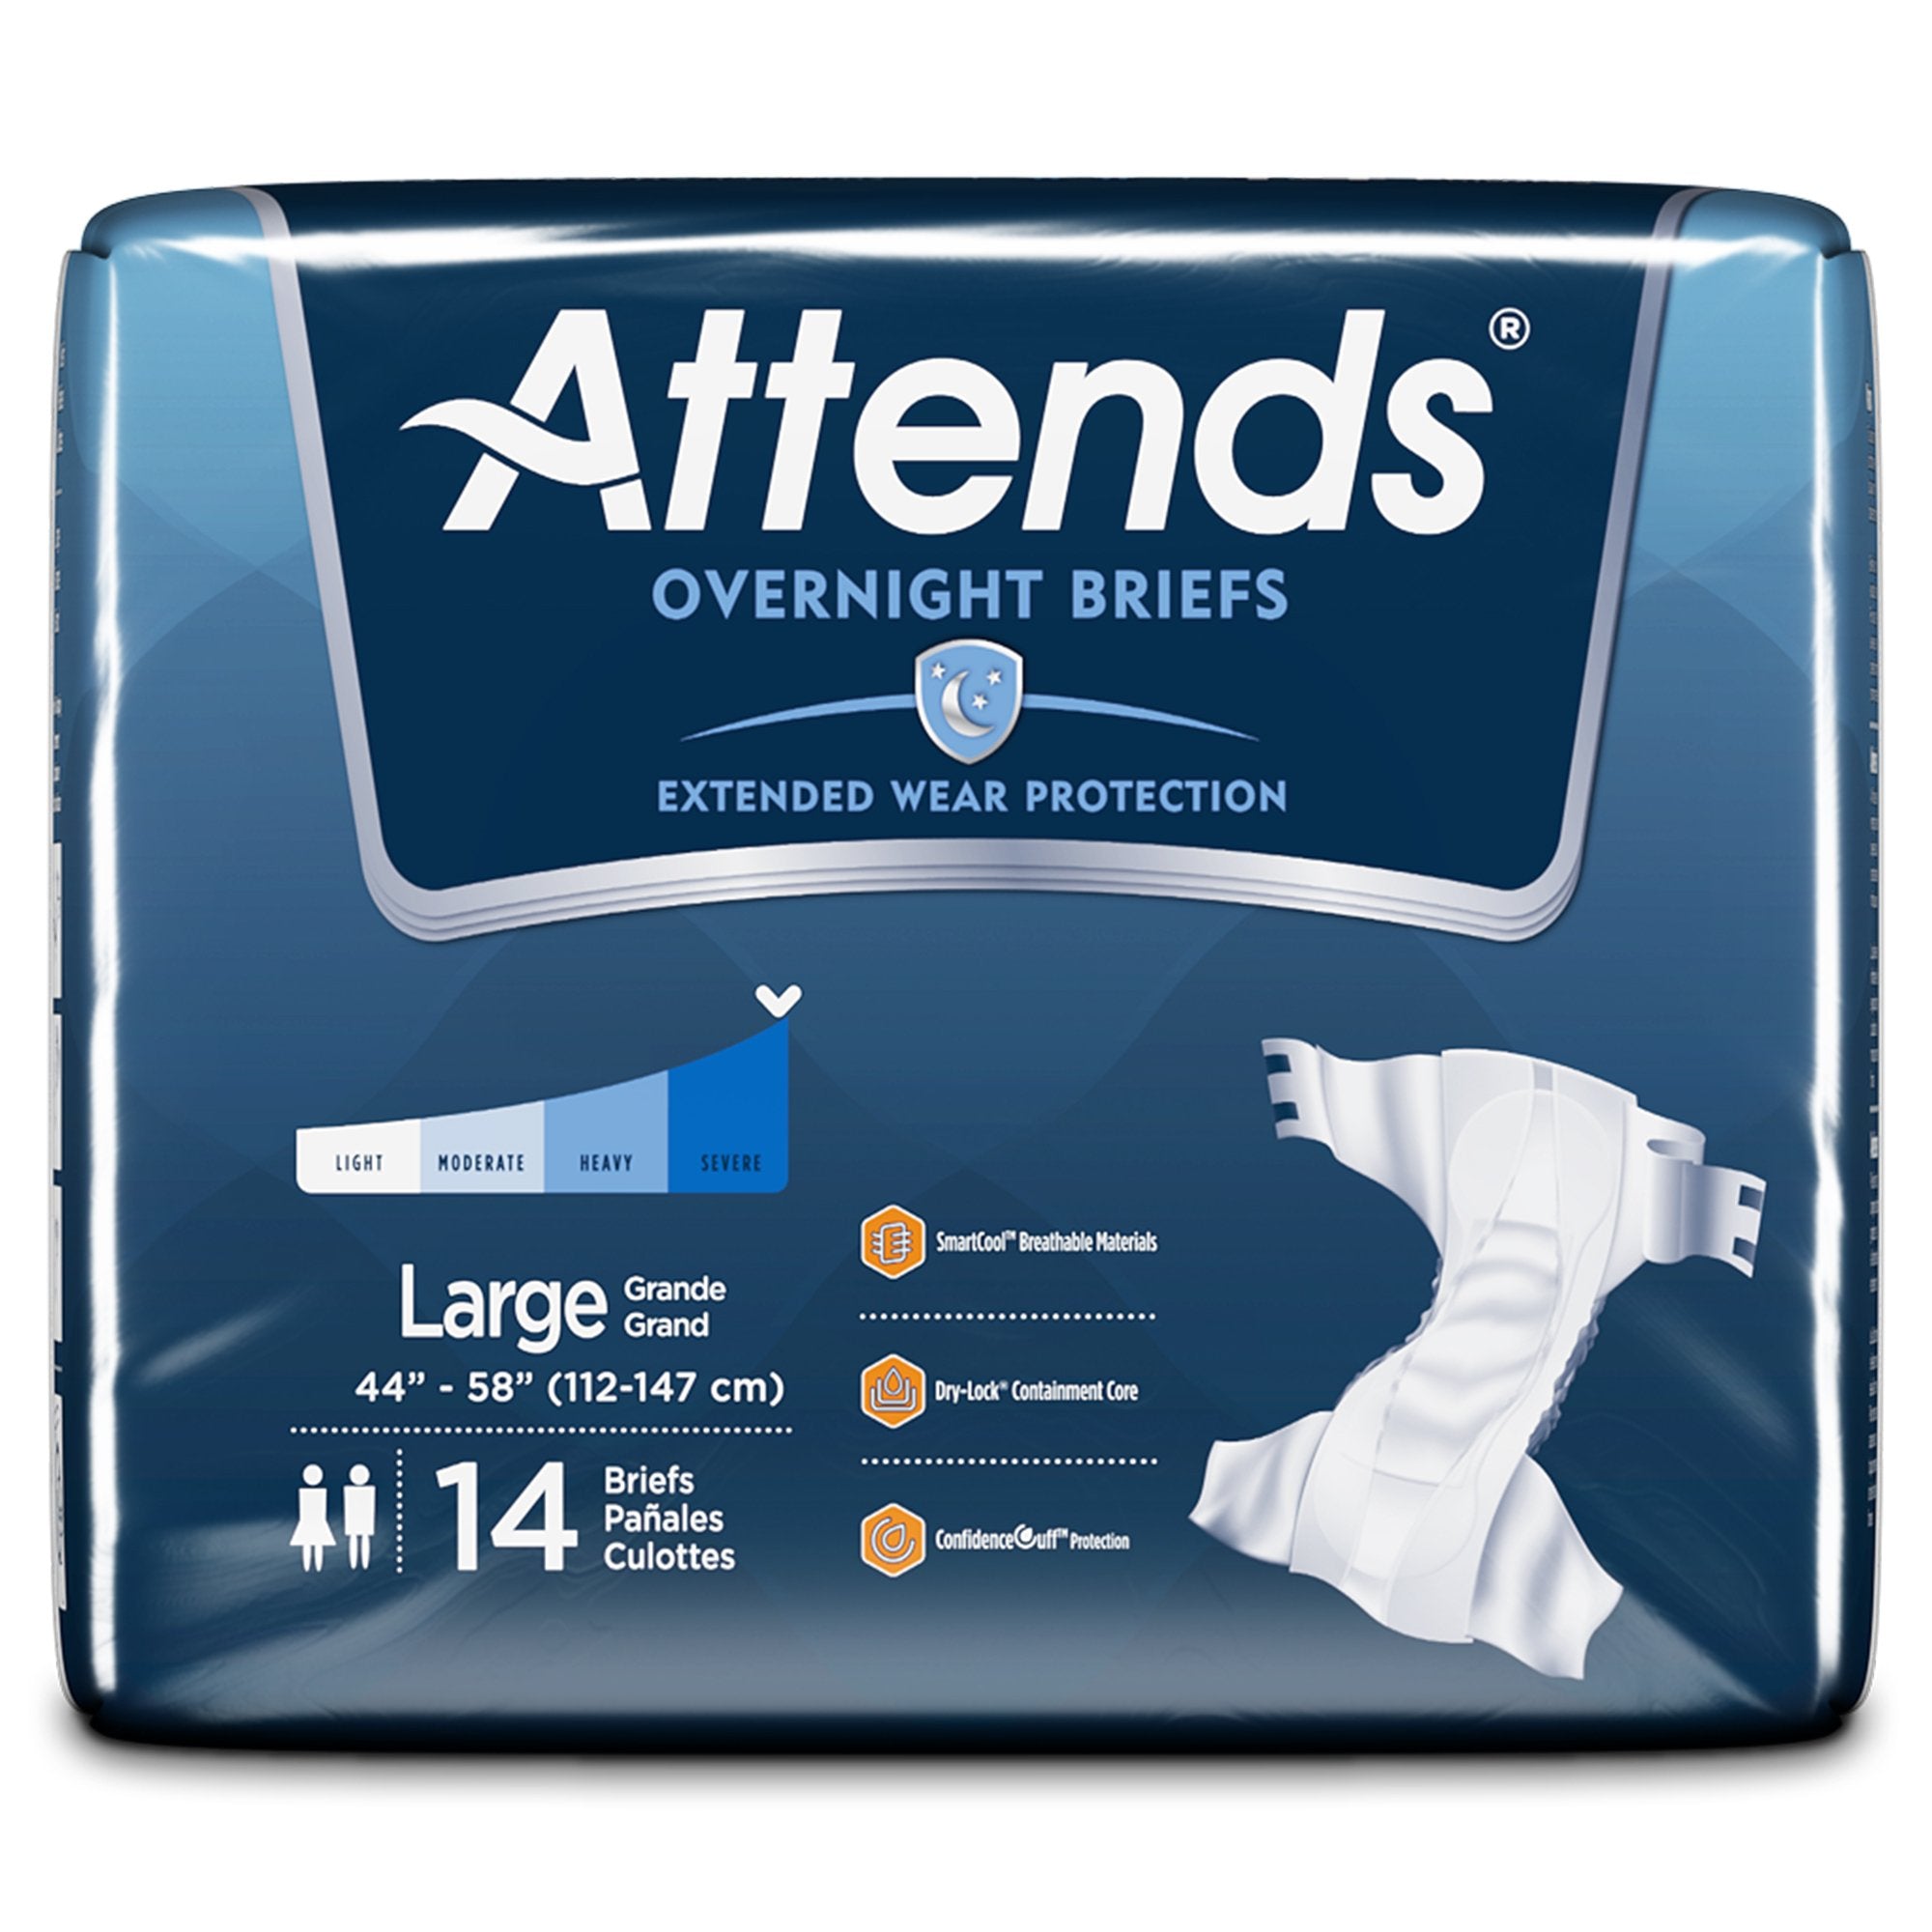 Unisex Adult Incontinence Brief Attends® Overnight Large Disposable Heavy Absorbency